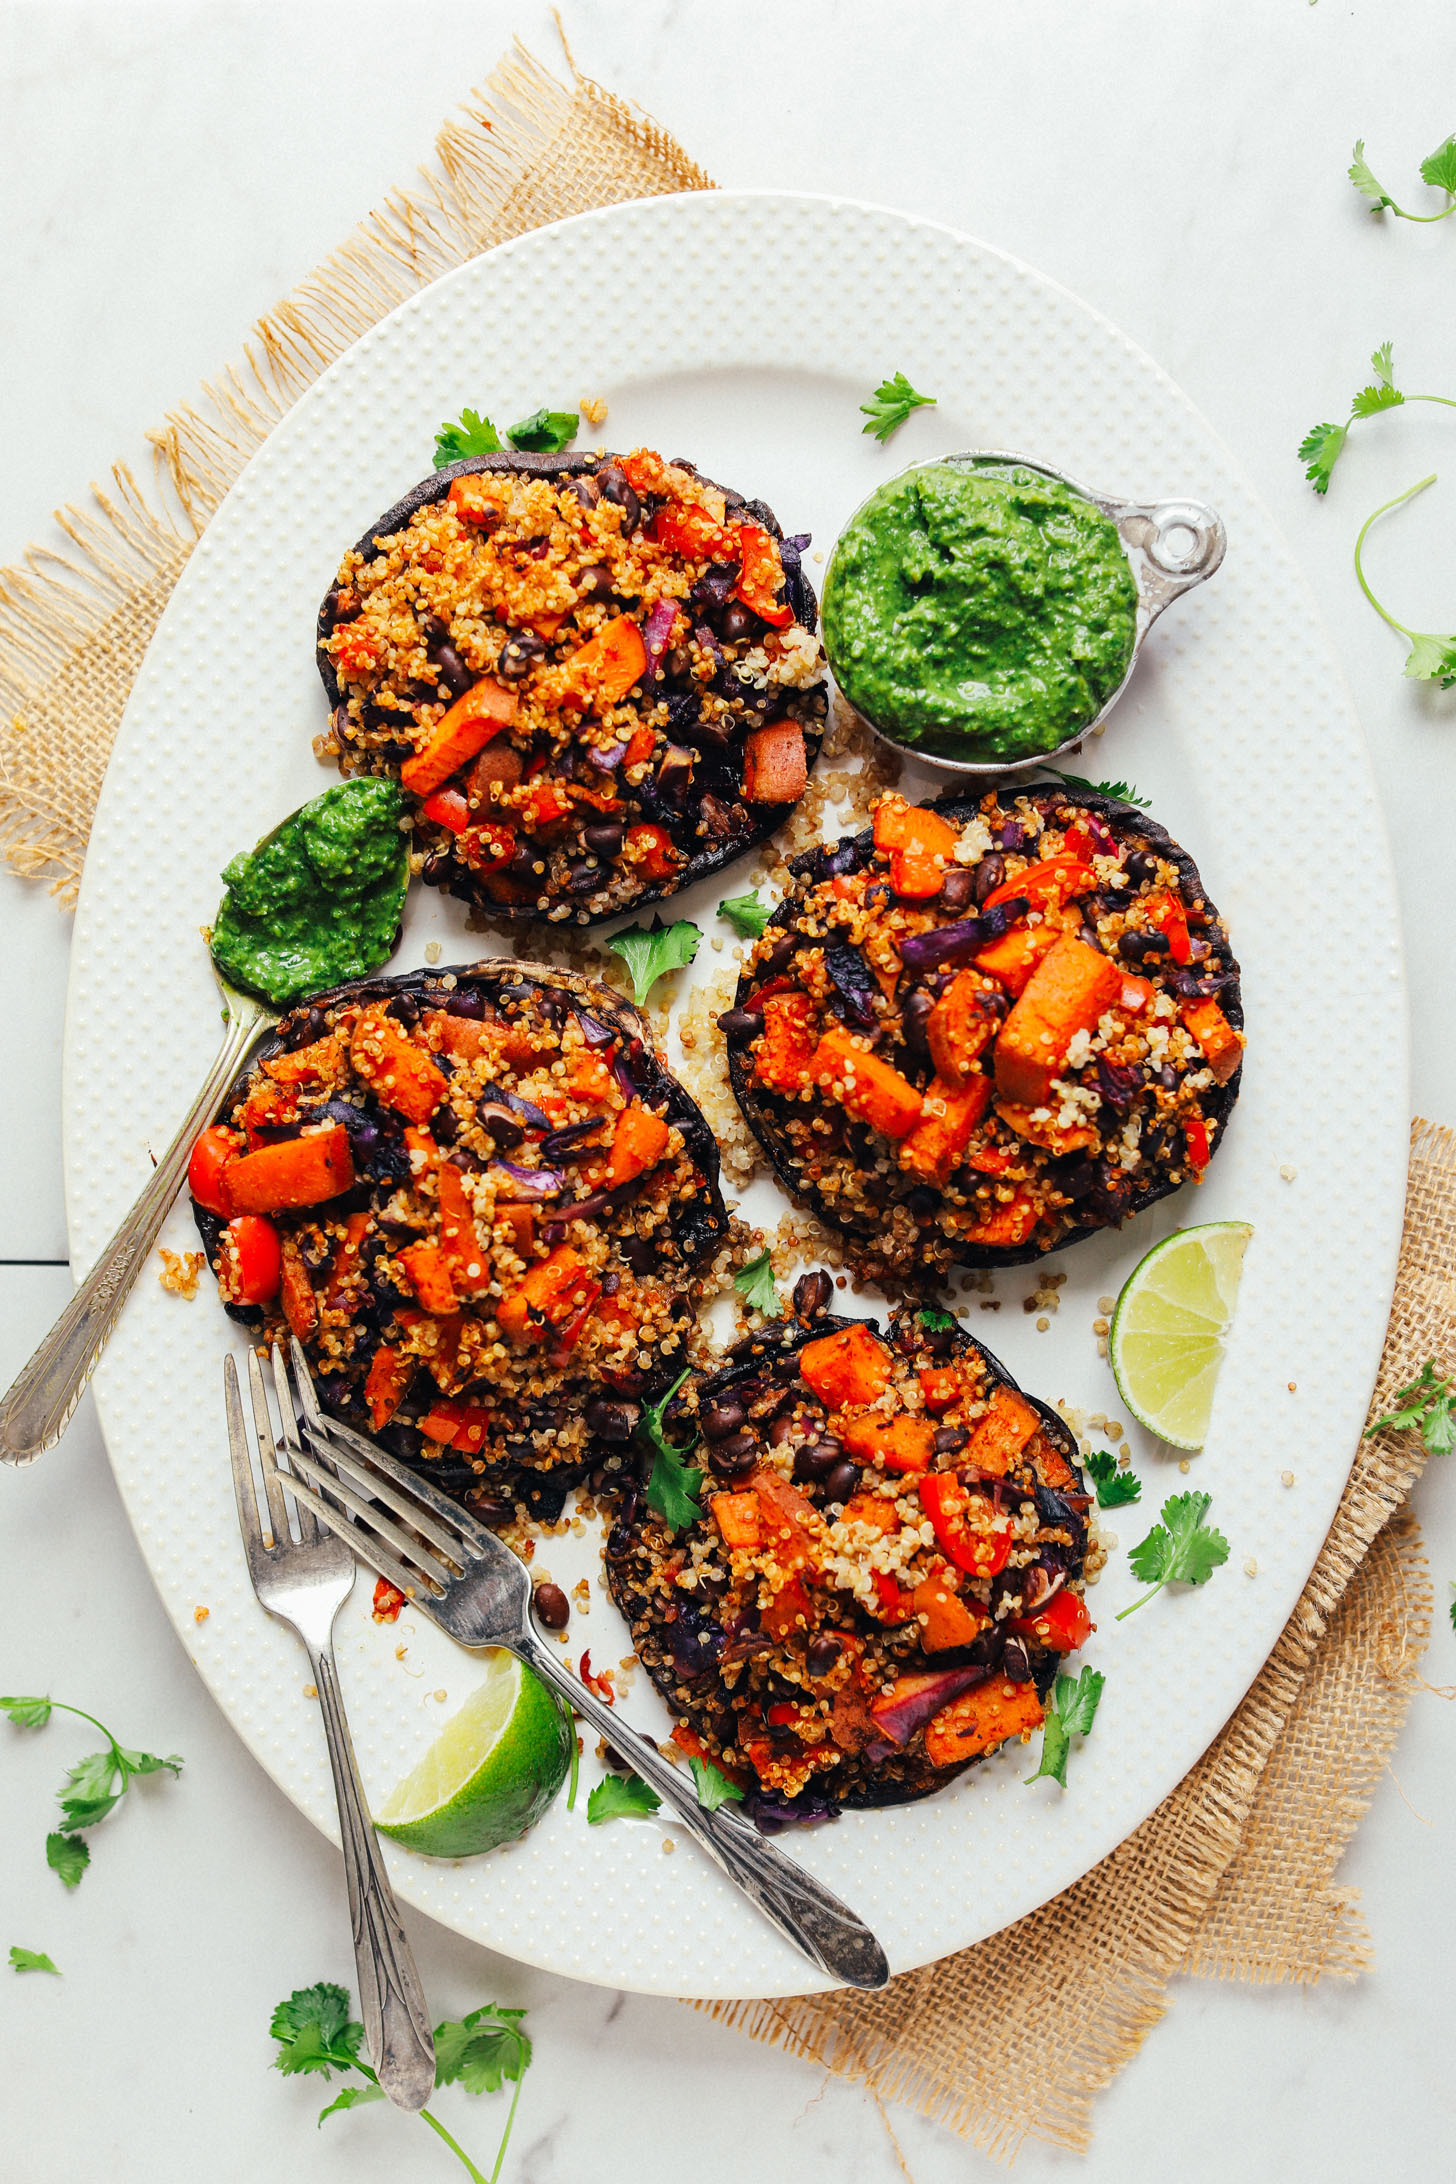 Four big Vegetable Quinoa Stuffed Portoballo Mushrooms on a large serving platter with a side of Chimichurri